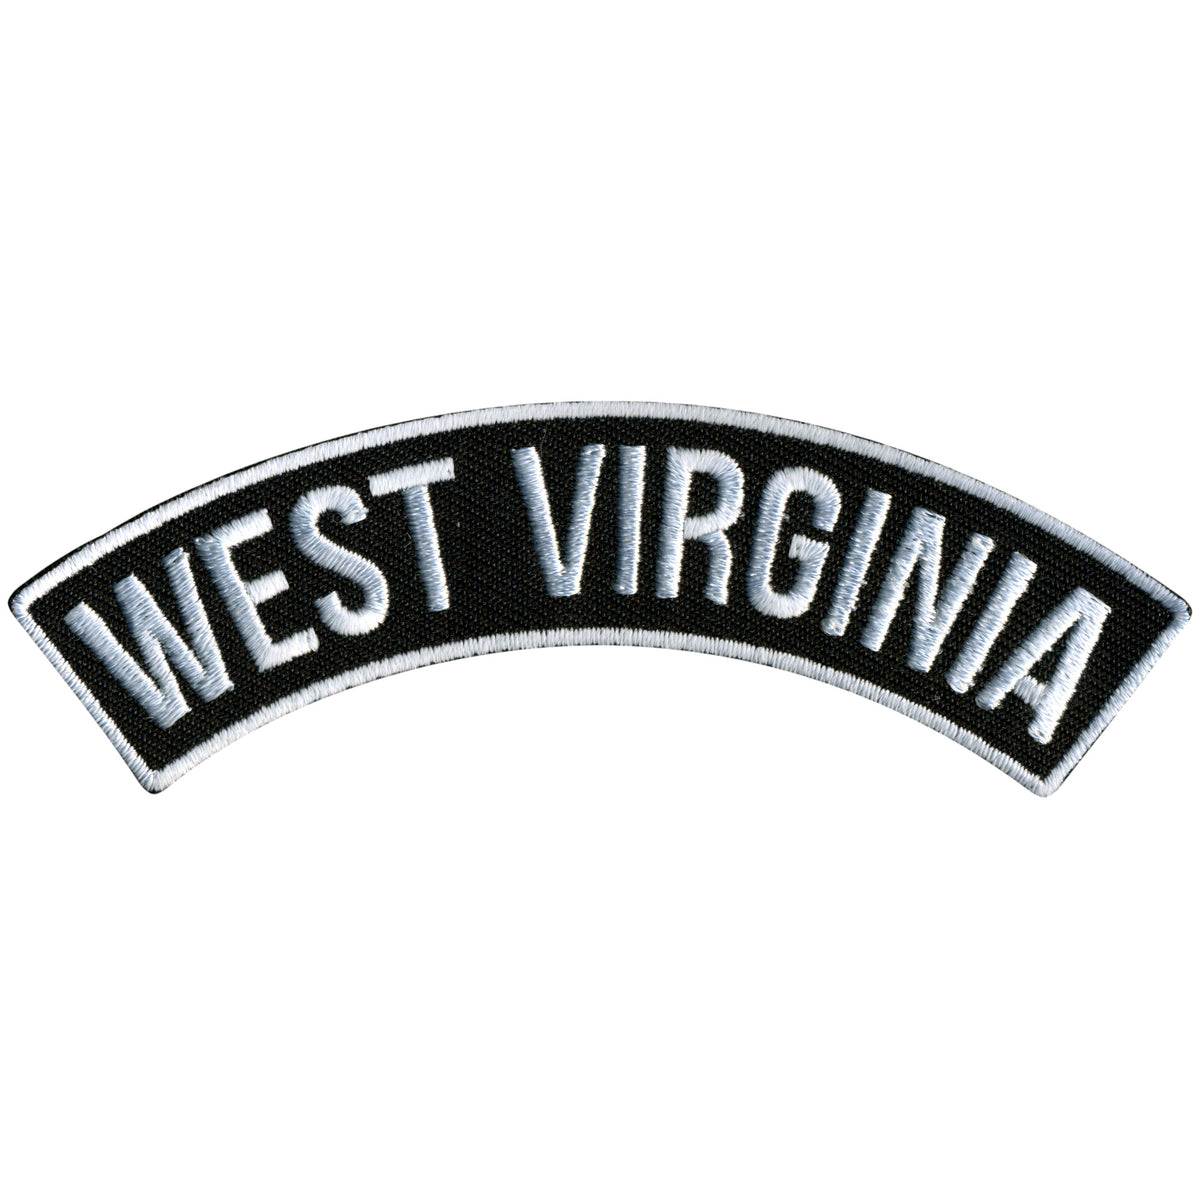 Hot Leathers West Virginia 4” X 1” Top Rocker Patch